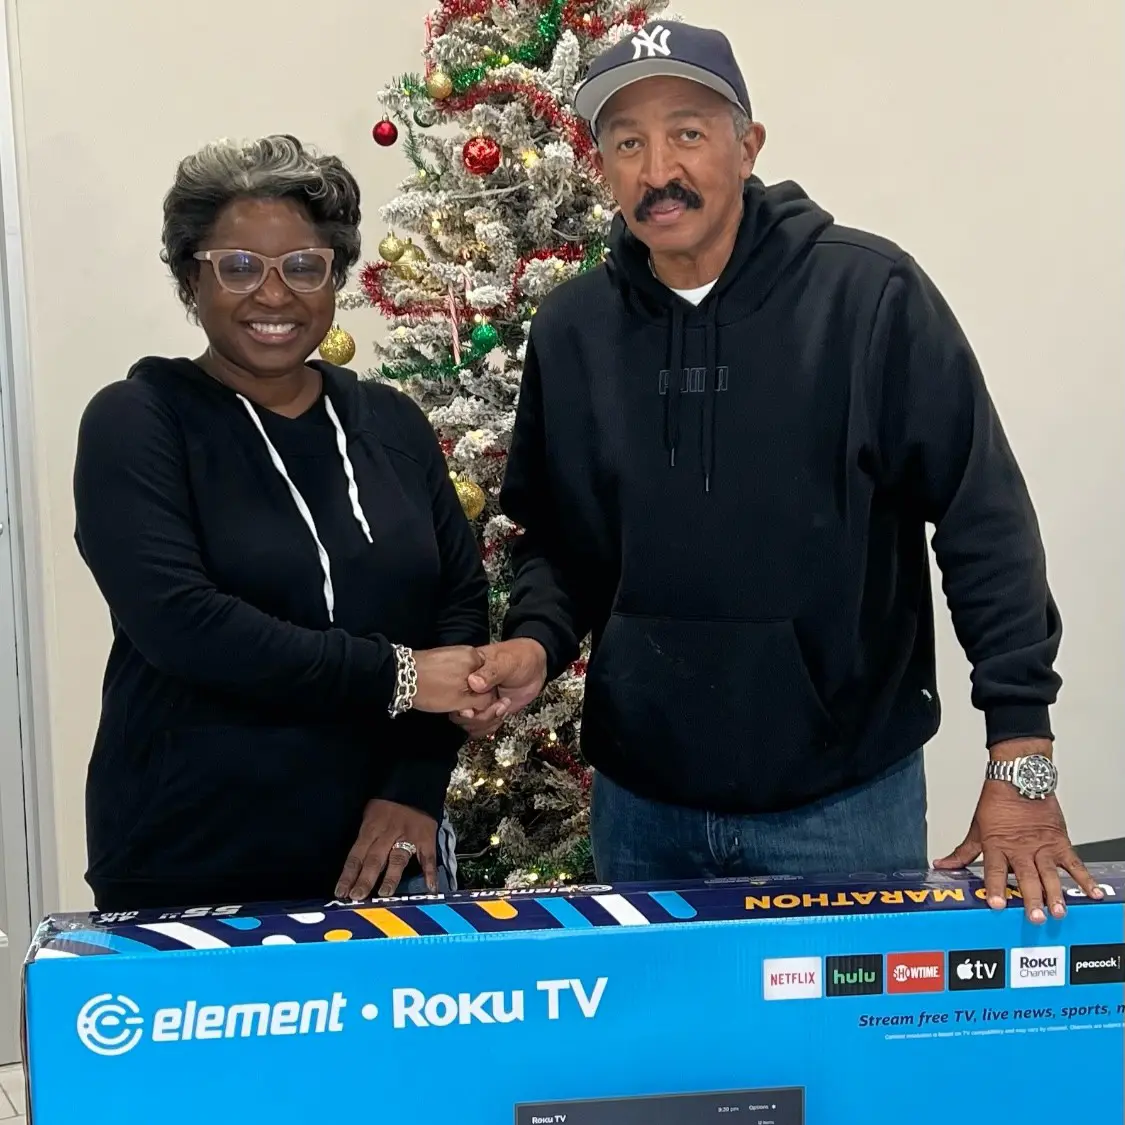 Woman and man shaking hands posing with an Element TV box